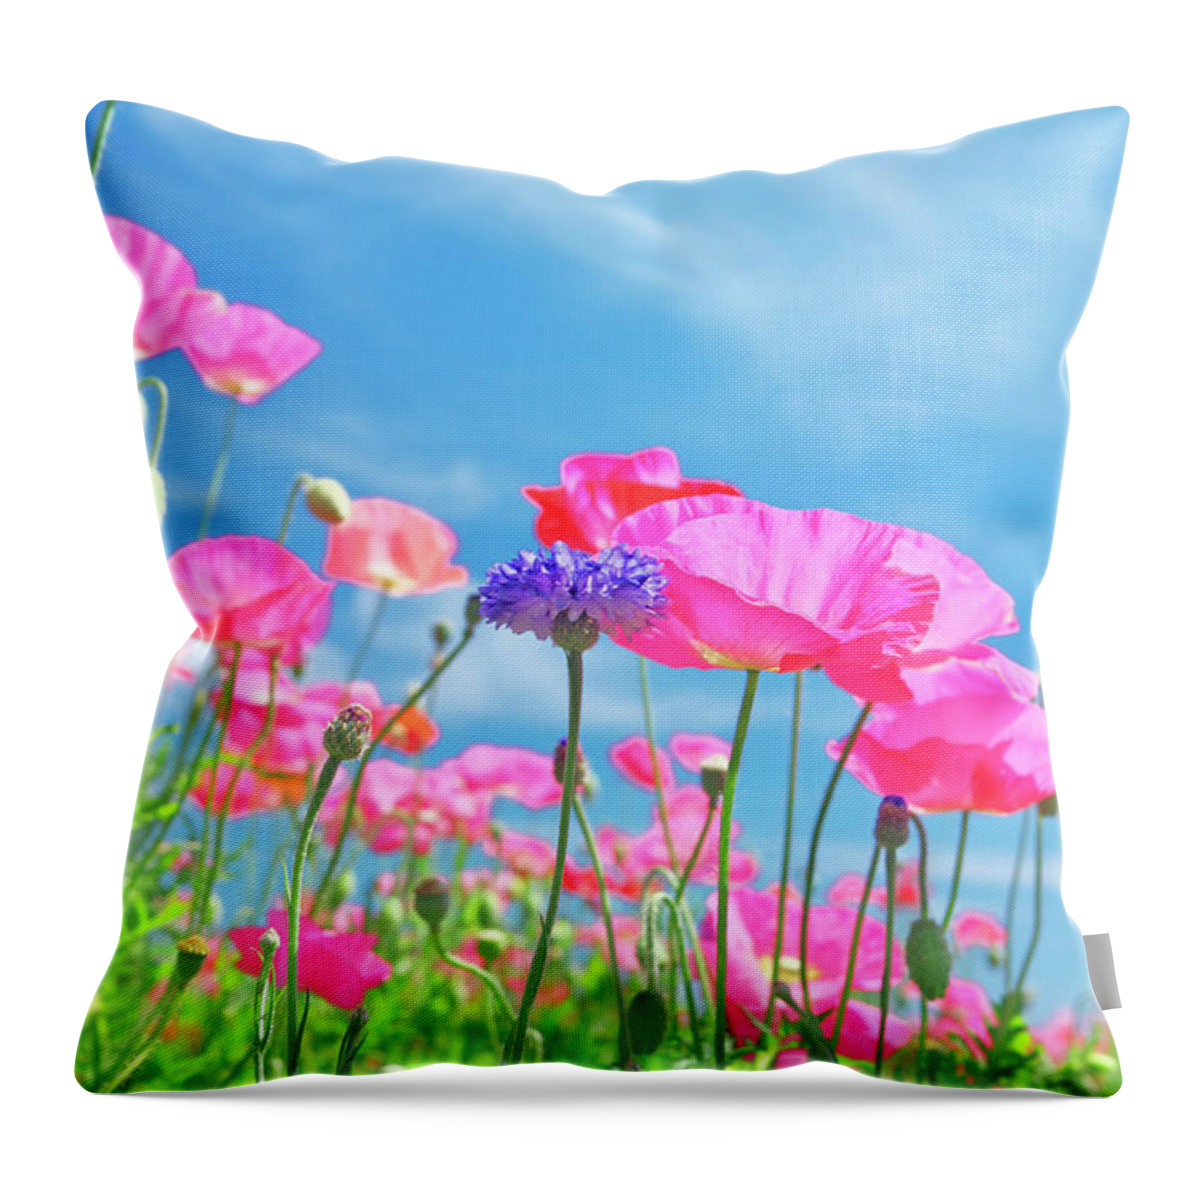 Outdoors Throw Pillow featuring the photograph Pink Poppies And Blue Sky by Iplan/a.collectionrf